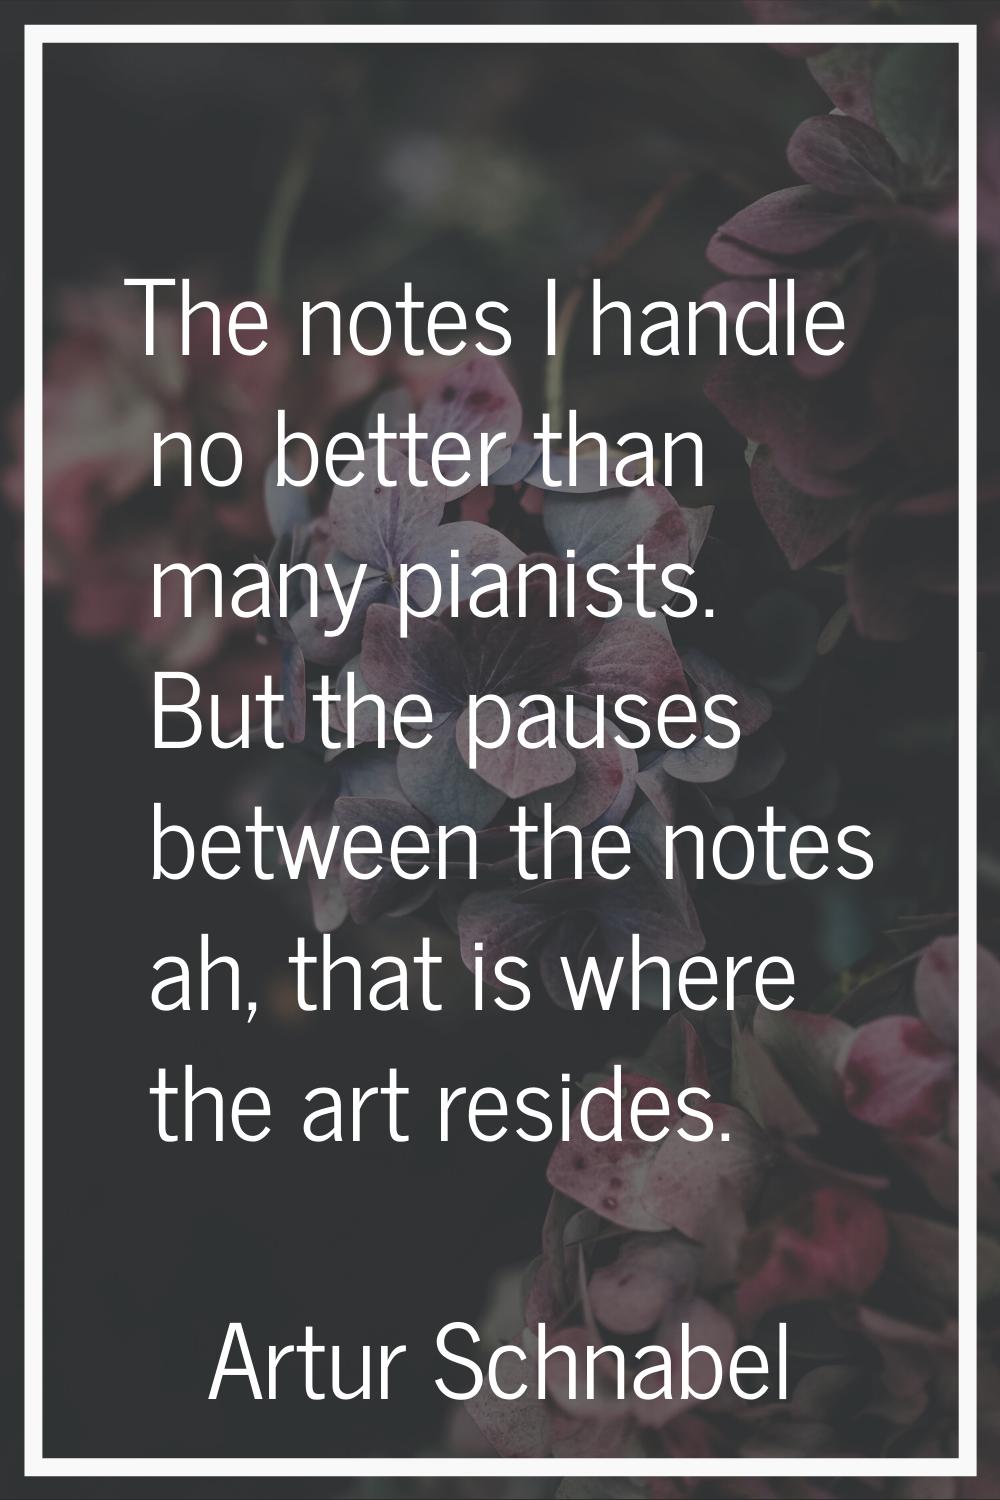 The notes I handle no better than many pianists. But the pauses between the notes ah, that is where